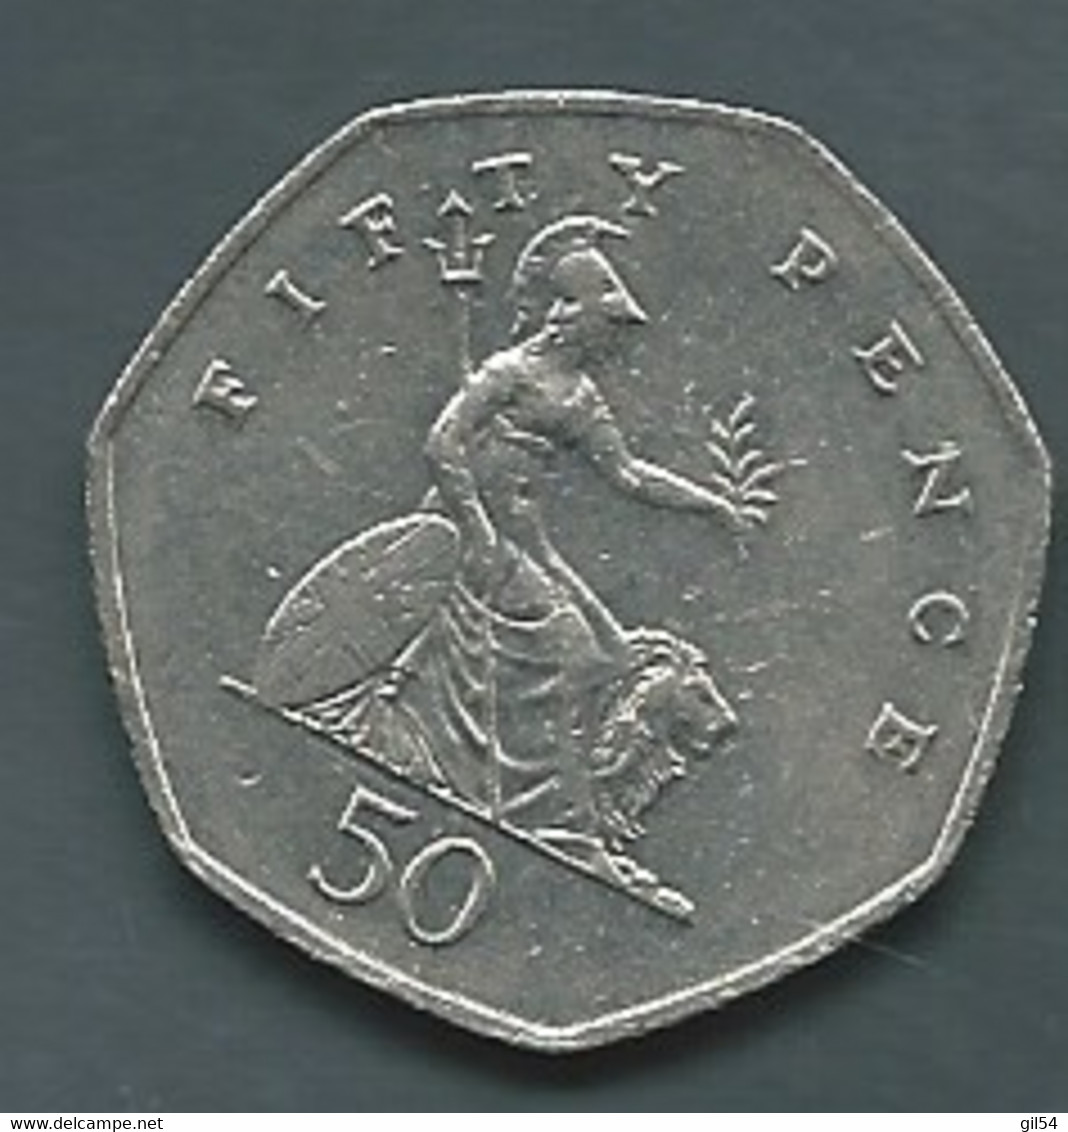 Coin , Great Britain UK 50 Pence 2001  Pic 7703 - 50 Pence